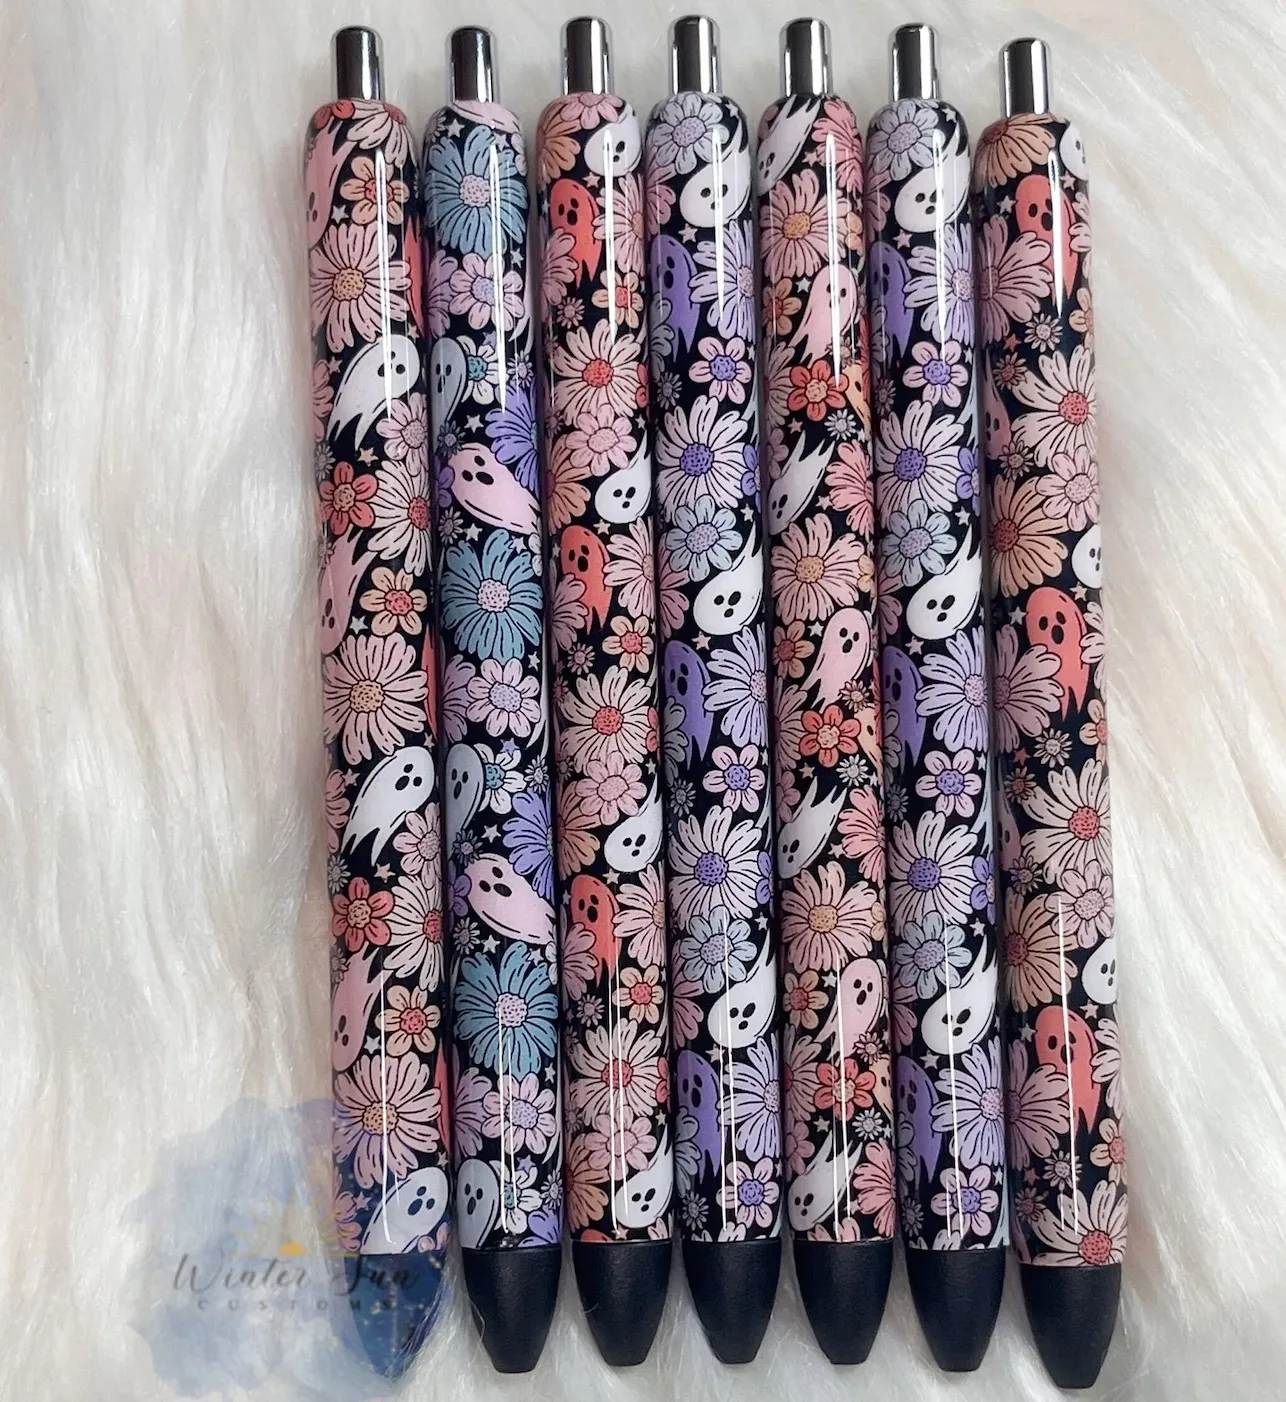 Floral patterned pens with ghosts